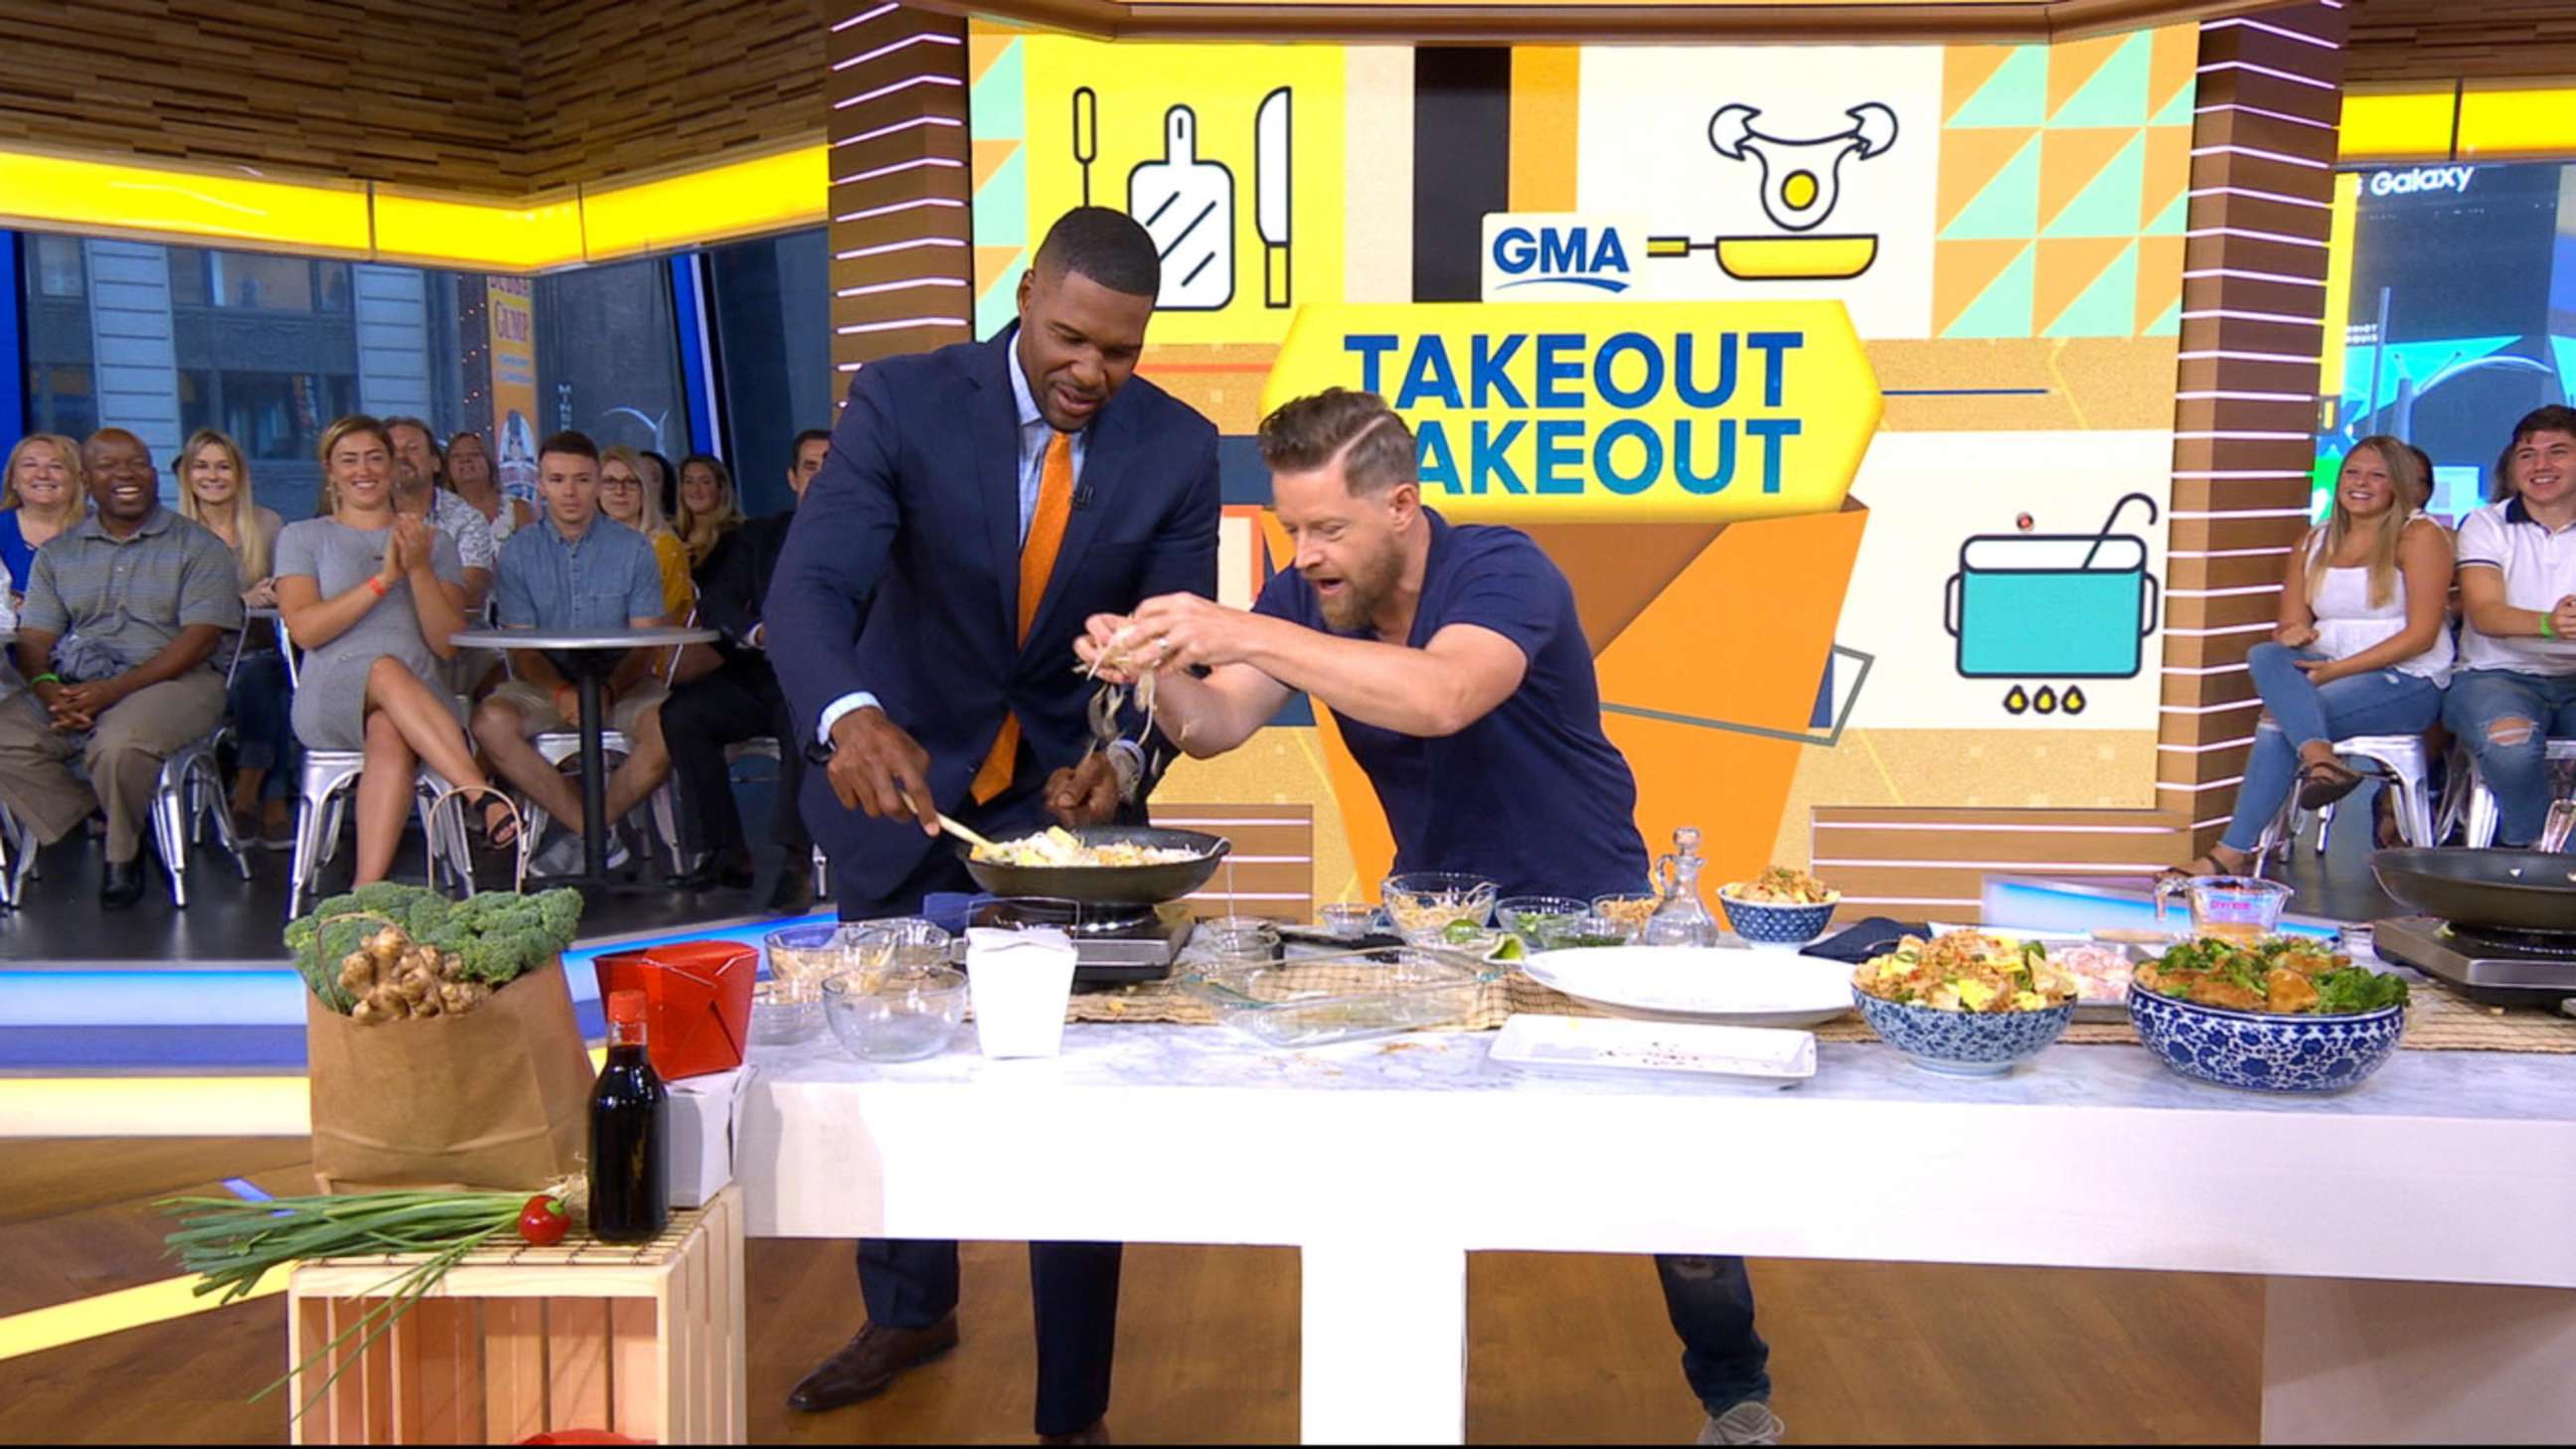 PHOTO: Chef and restaurateur Richard Blais shares his takeout fakeout recipes with "GMA."